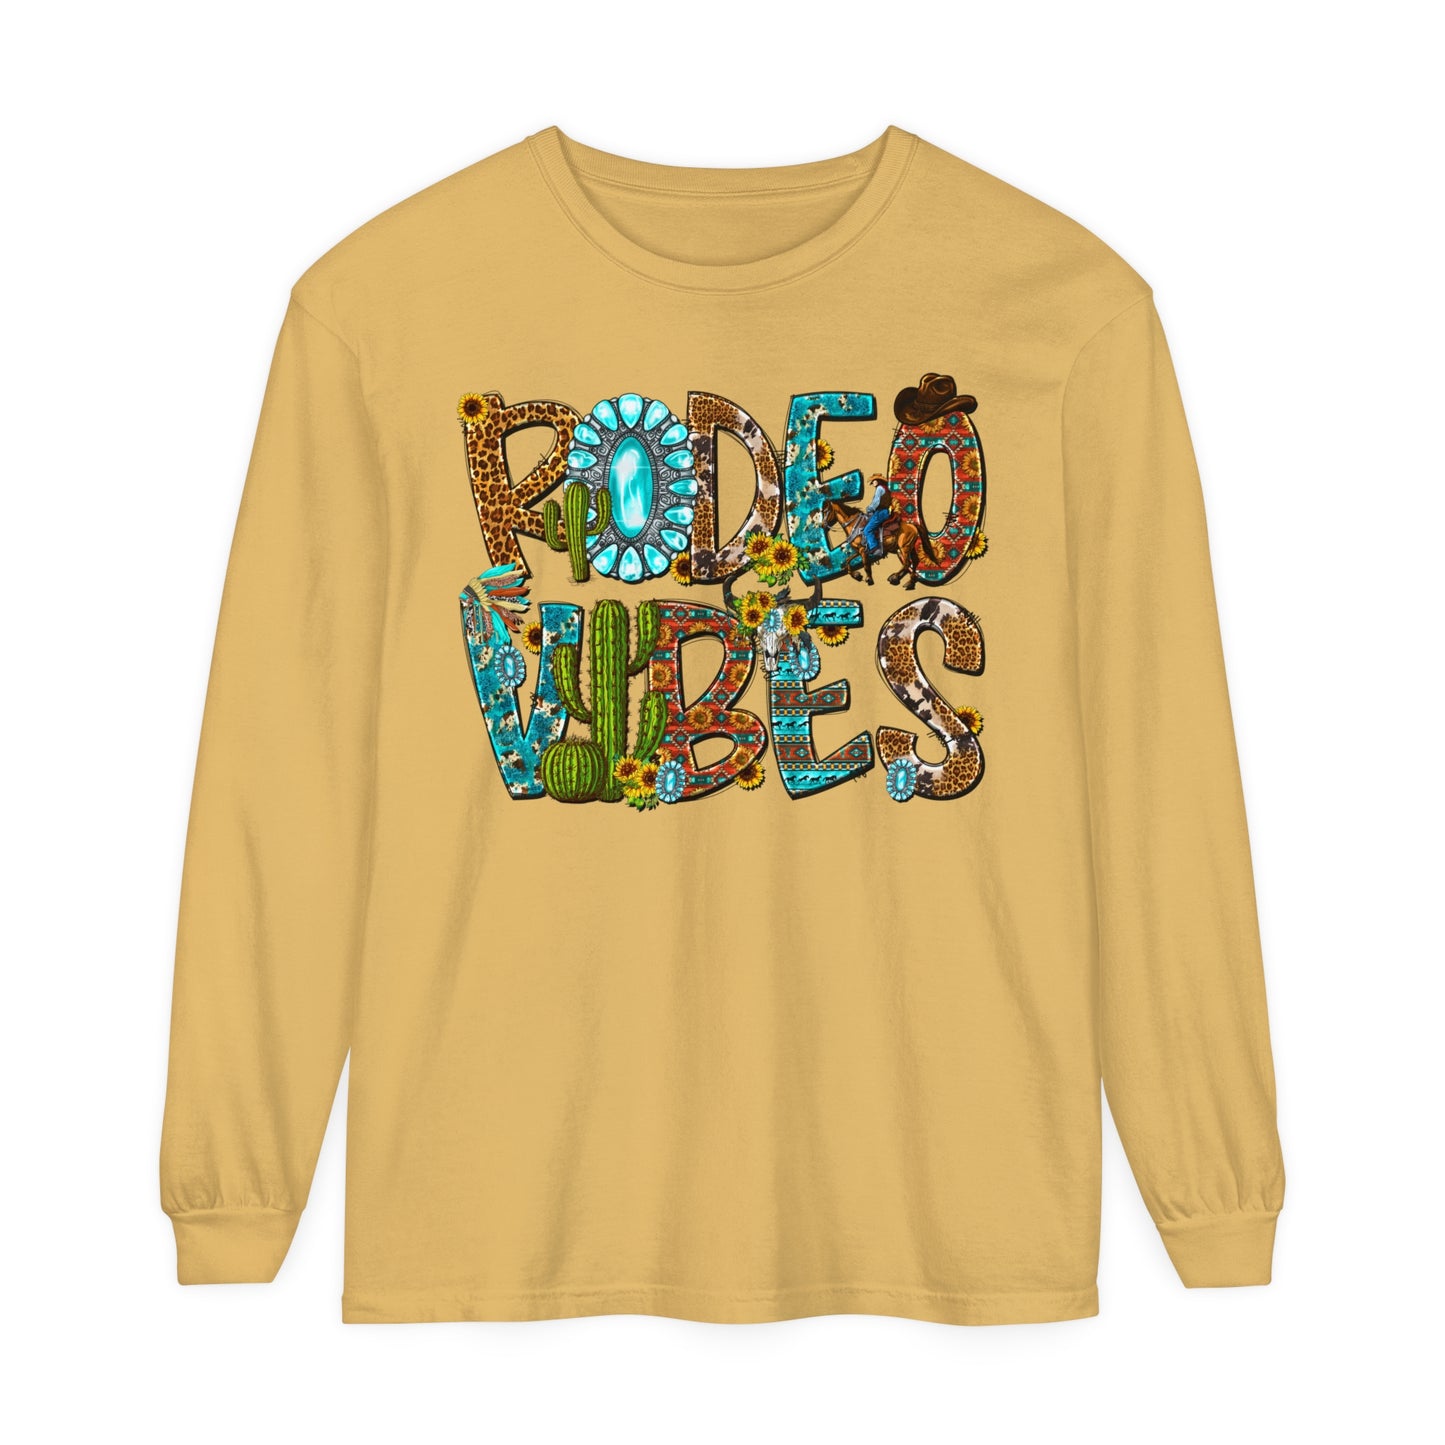 Rodeo Vibes Garment-dyed Long Sleeve T-Shirt, Rodeo T-Shirt, Western T-Shirt, Rodeo Shirt, Gifts for Her, Gifts For Mom, Rodeo Tee